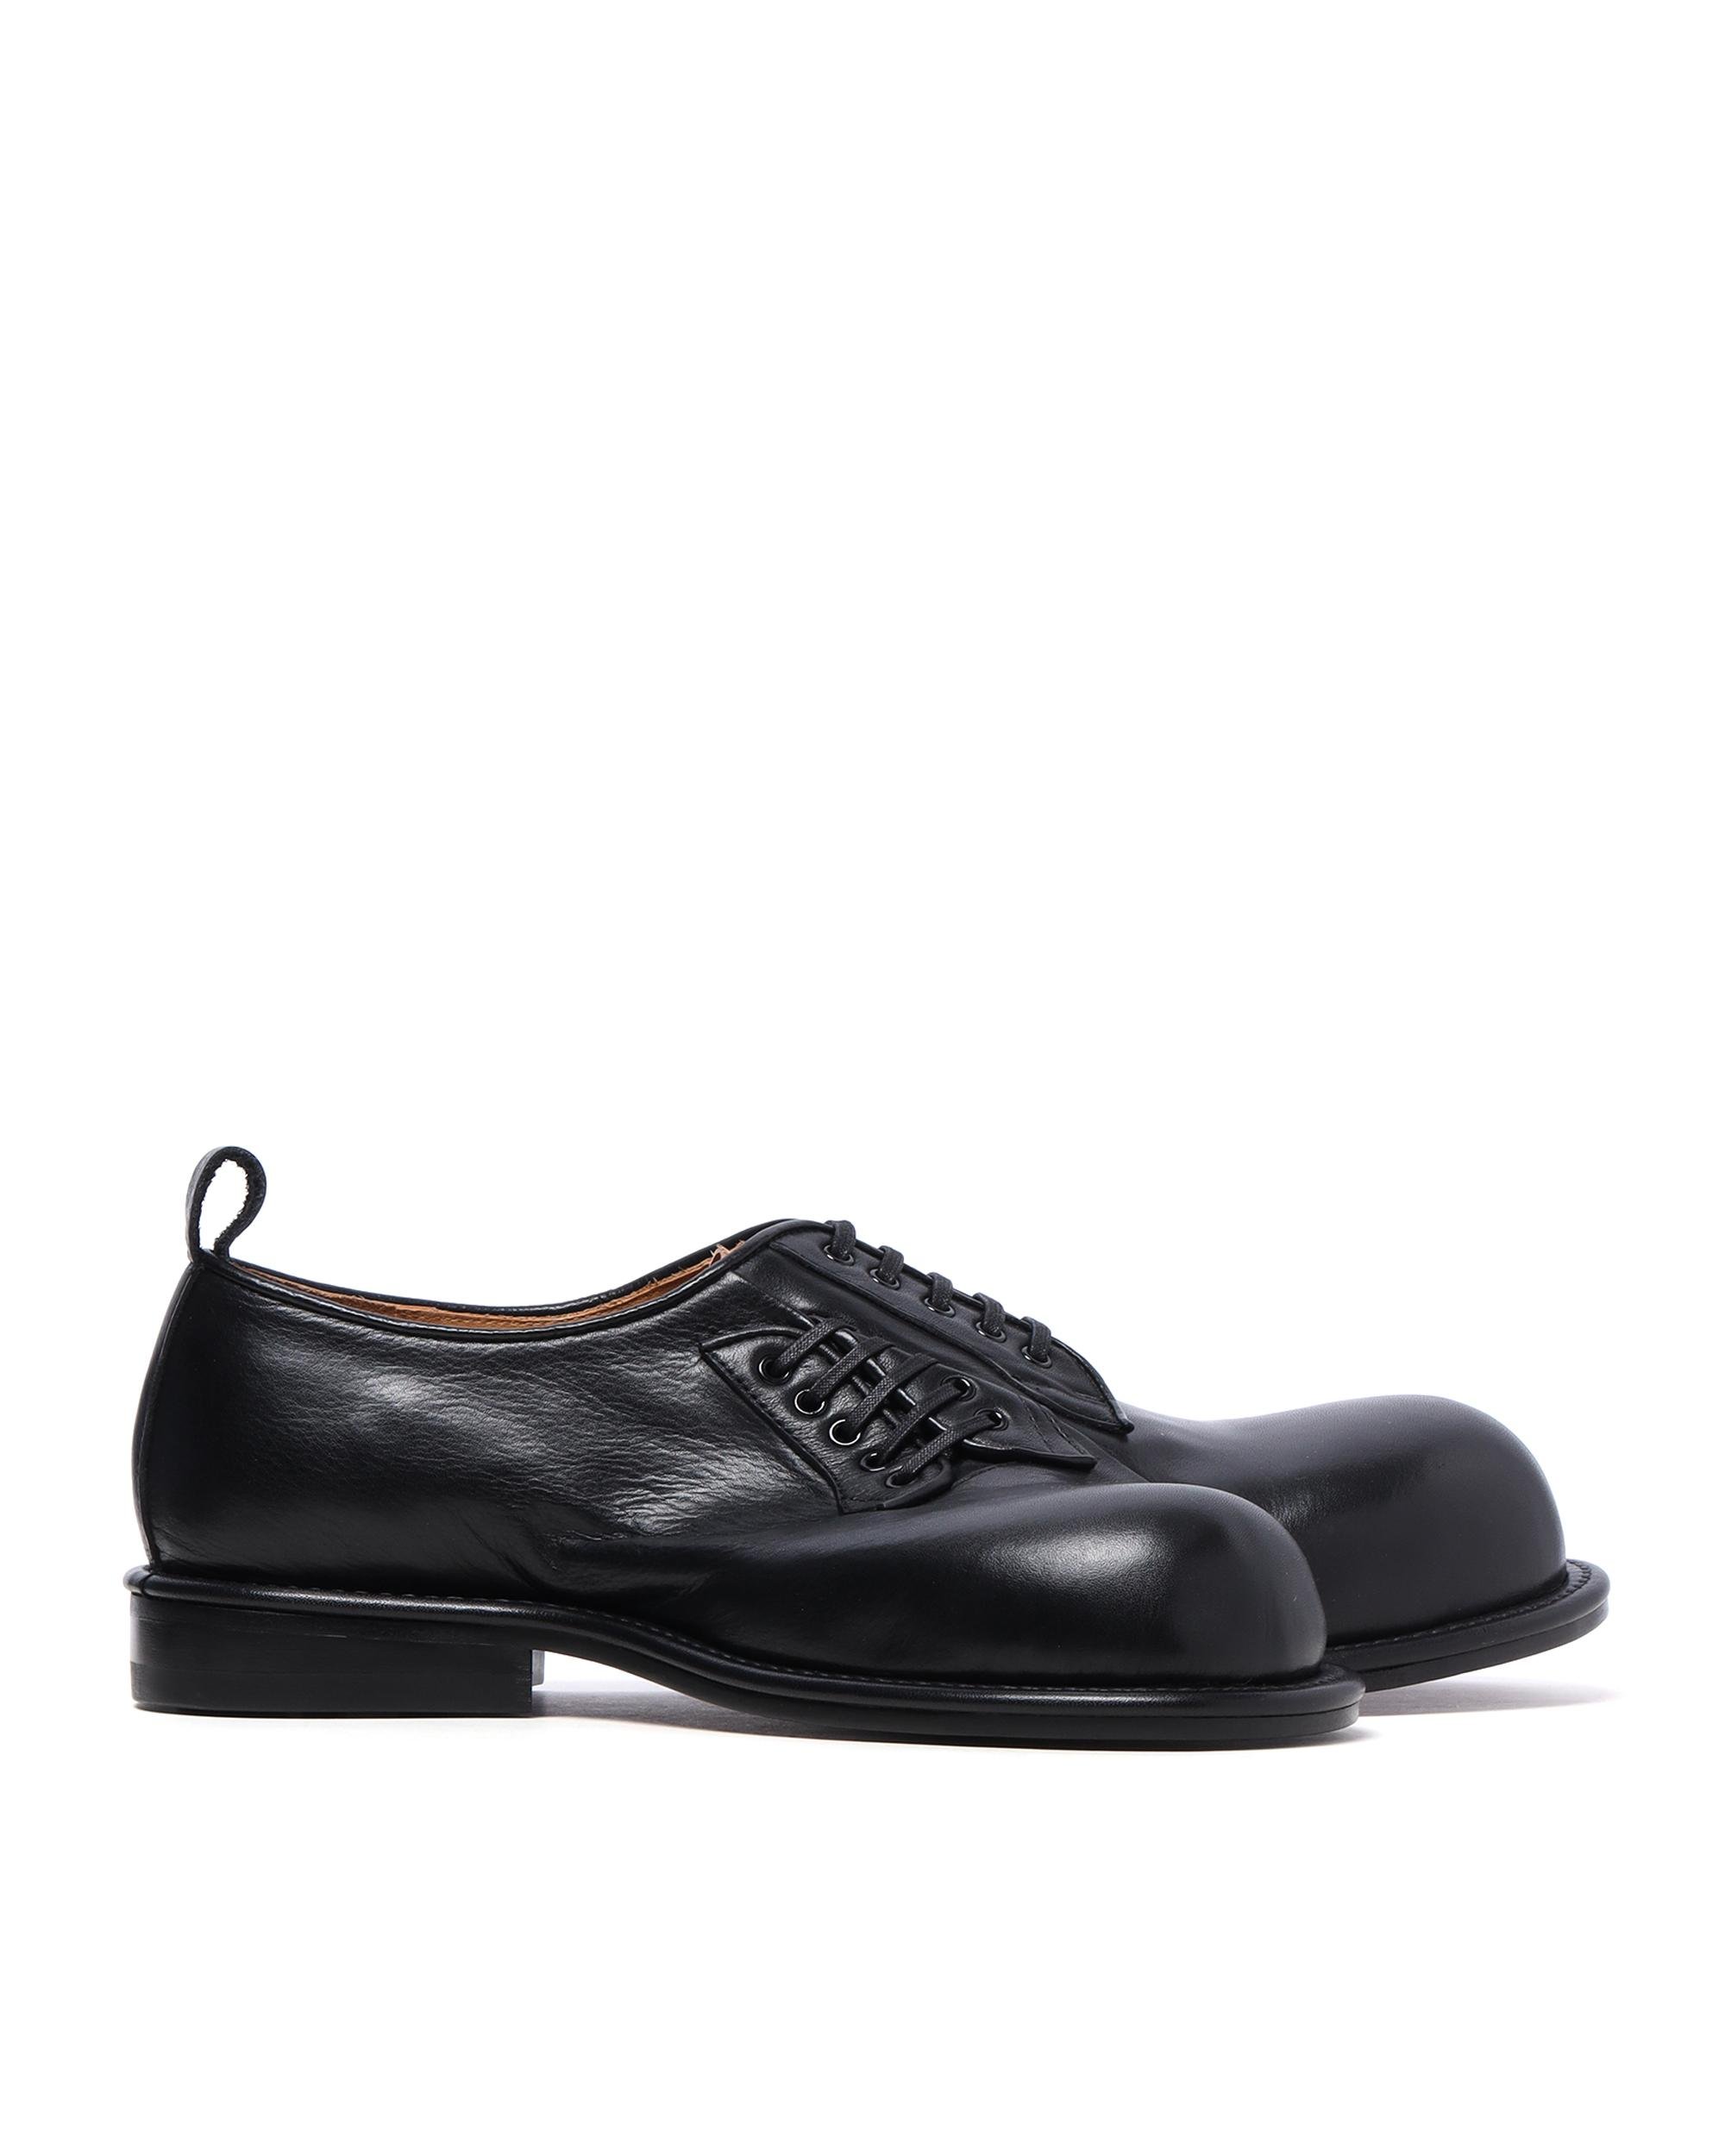 Double headed derby shoes by COMME DES GARCONS